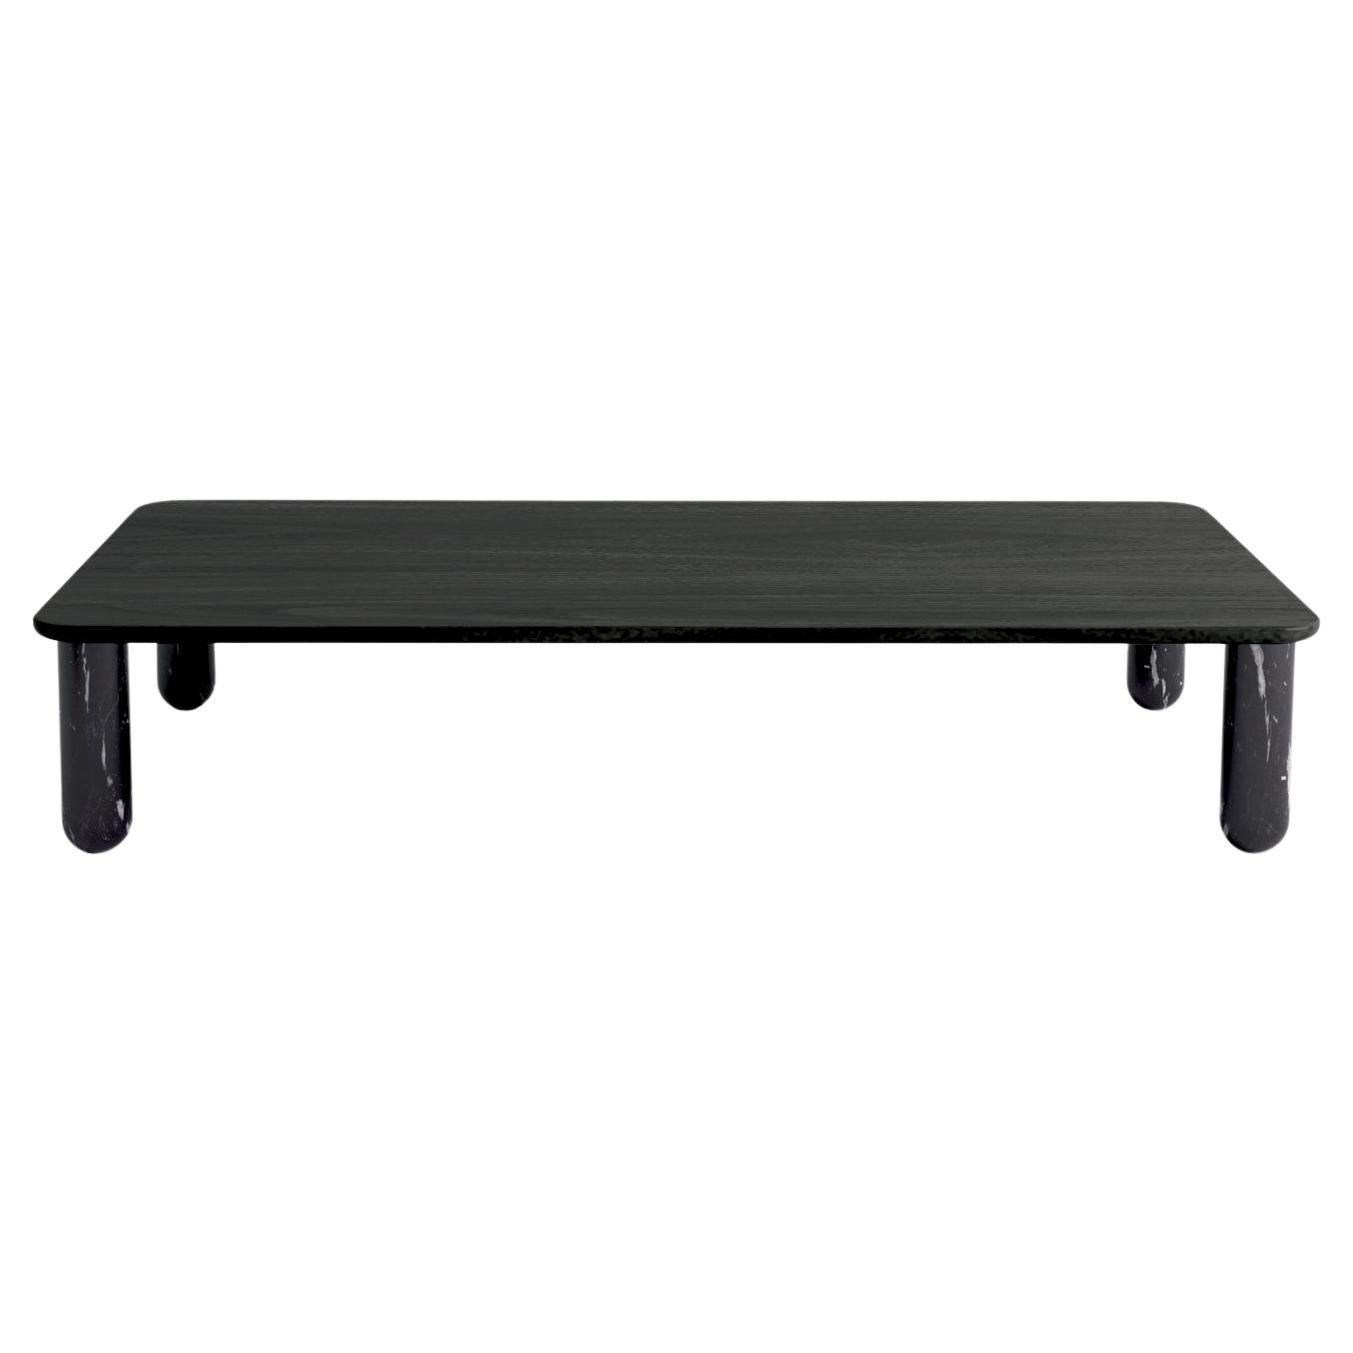 Xlarge Black Wood and Black Marble "Sunday" Coffee Table, Jean-Baptiste Souletie For Sale